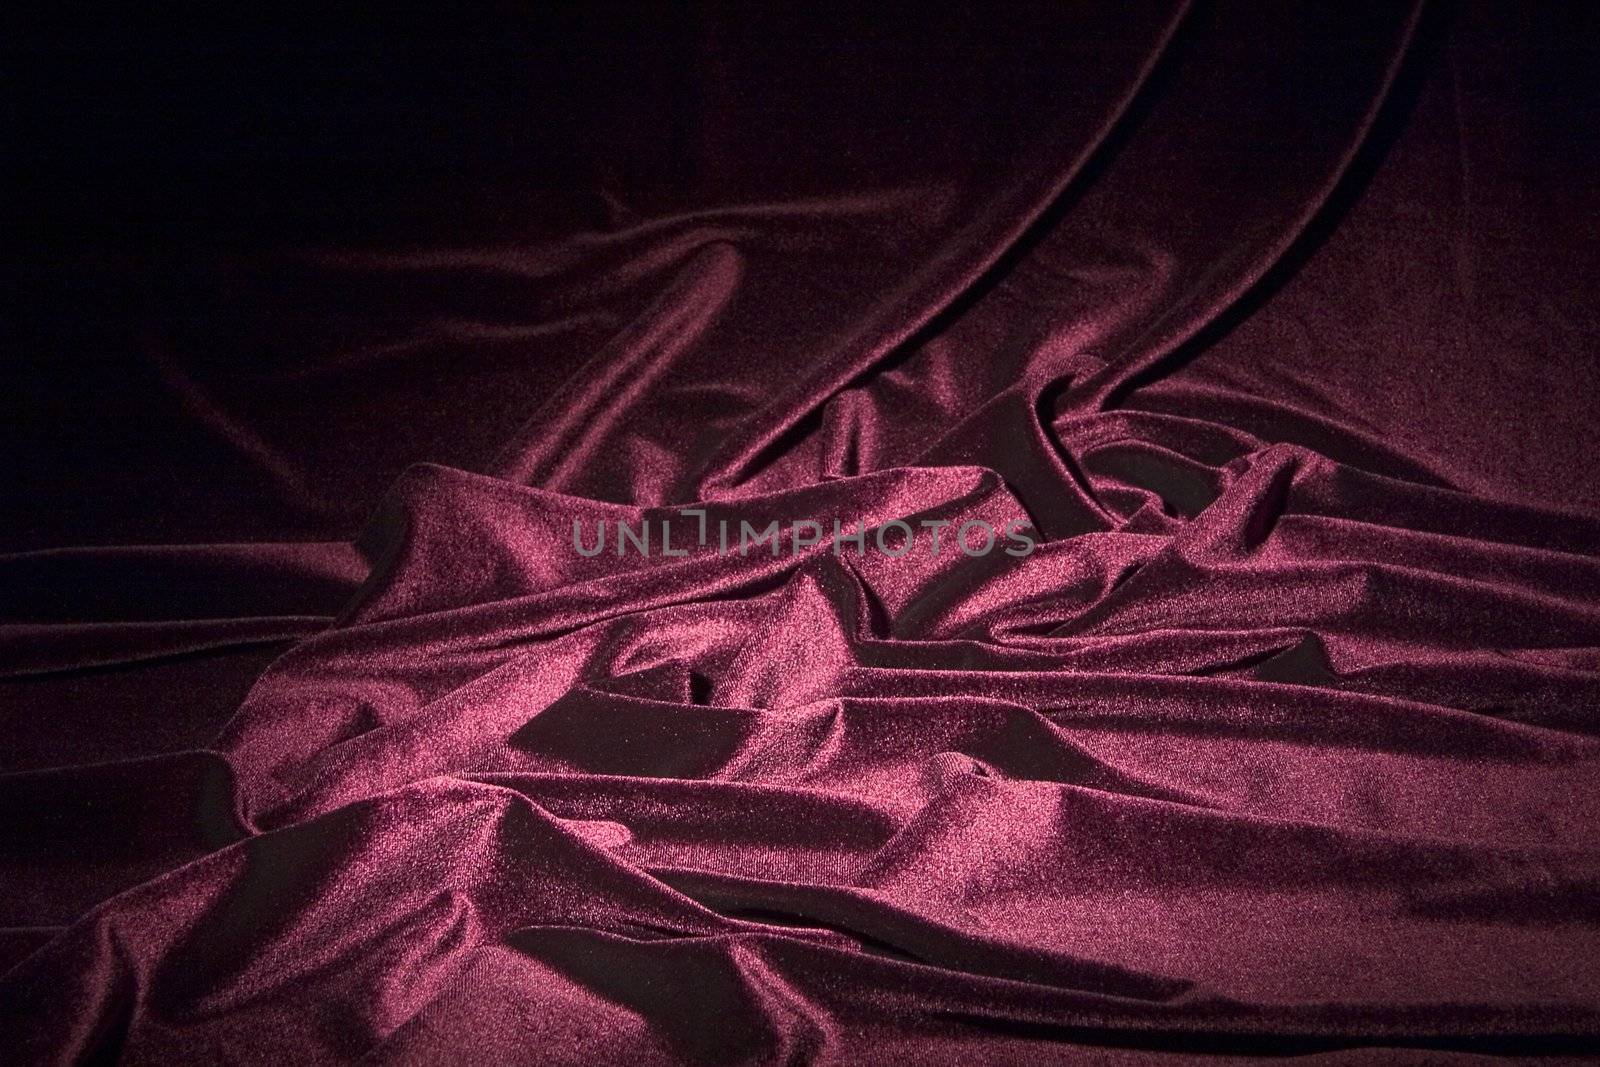 darkly-red glossy velvet is formative folds and light-shadow picture